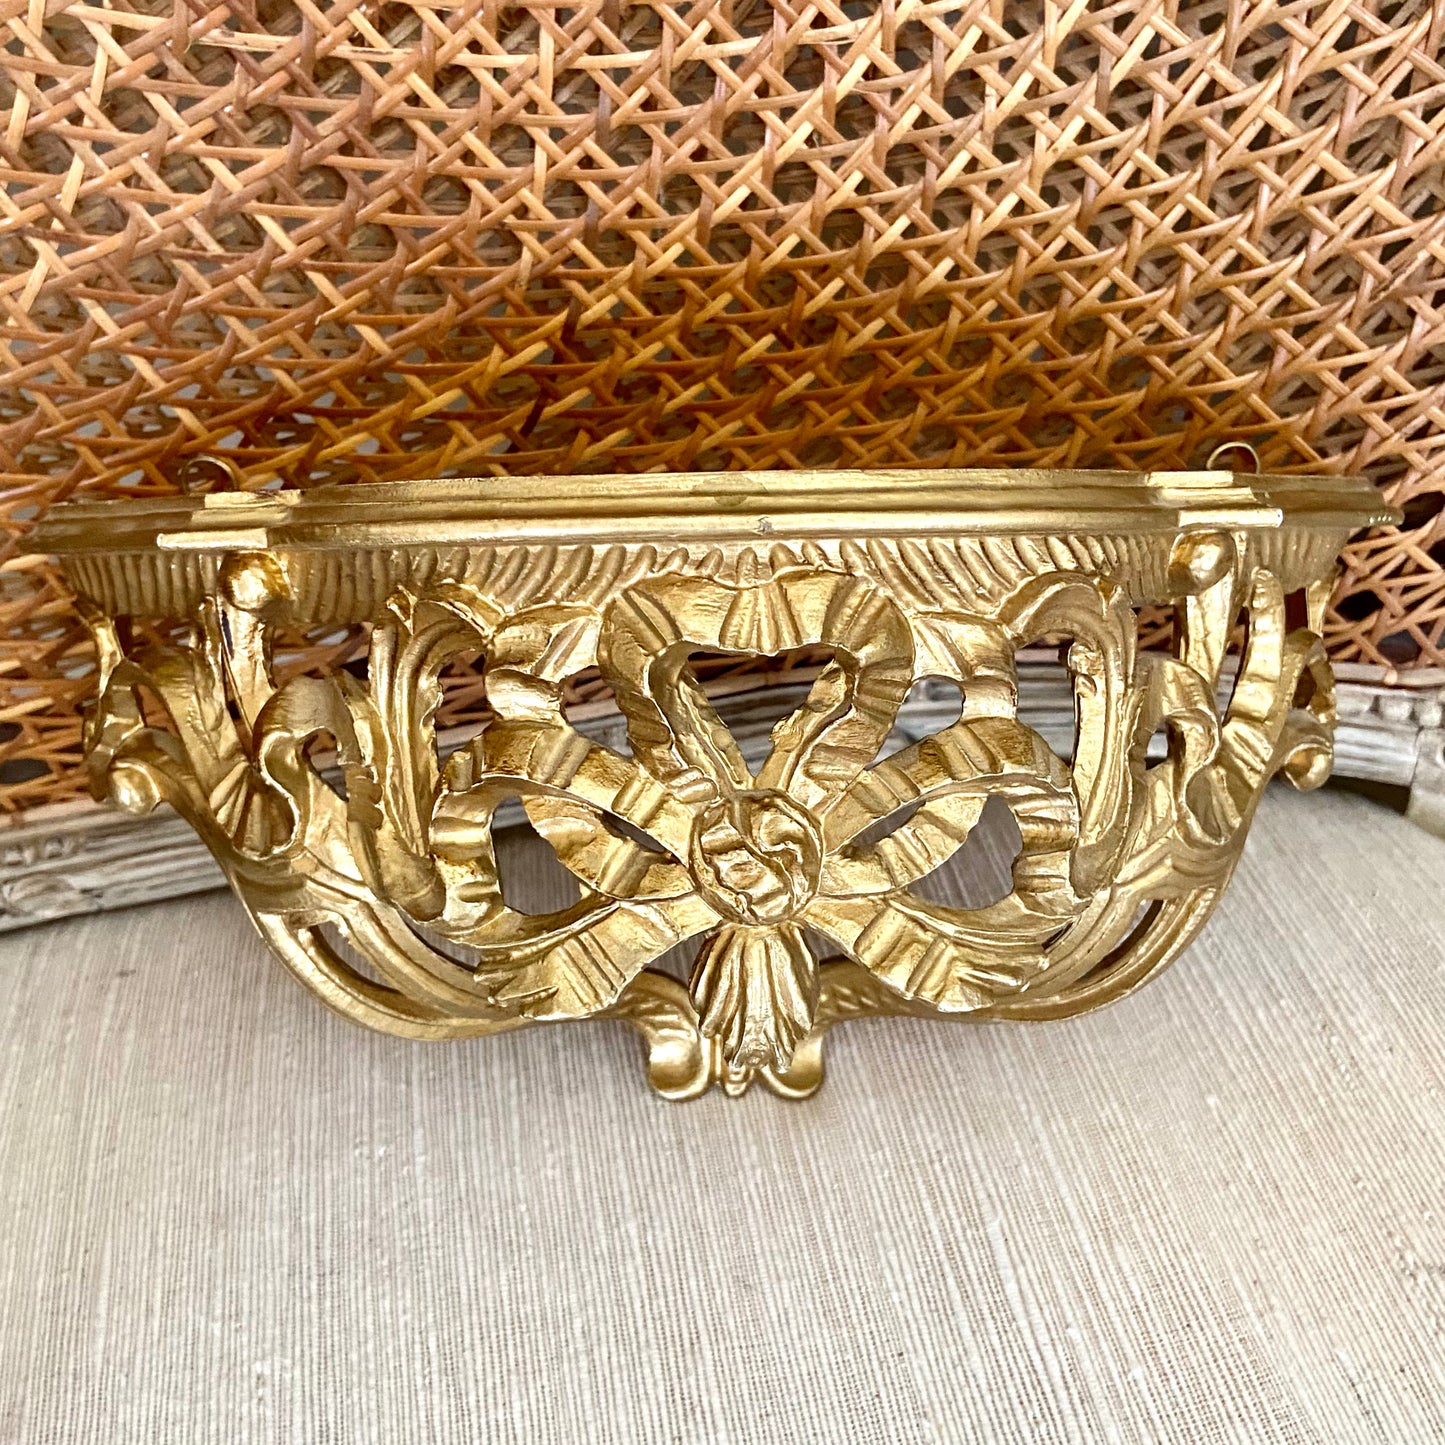 Vintage gold ornate bow wall sconce, 12x6” -Pristine!